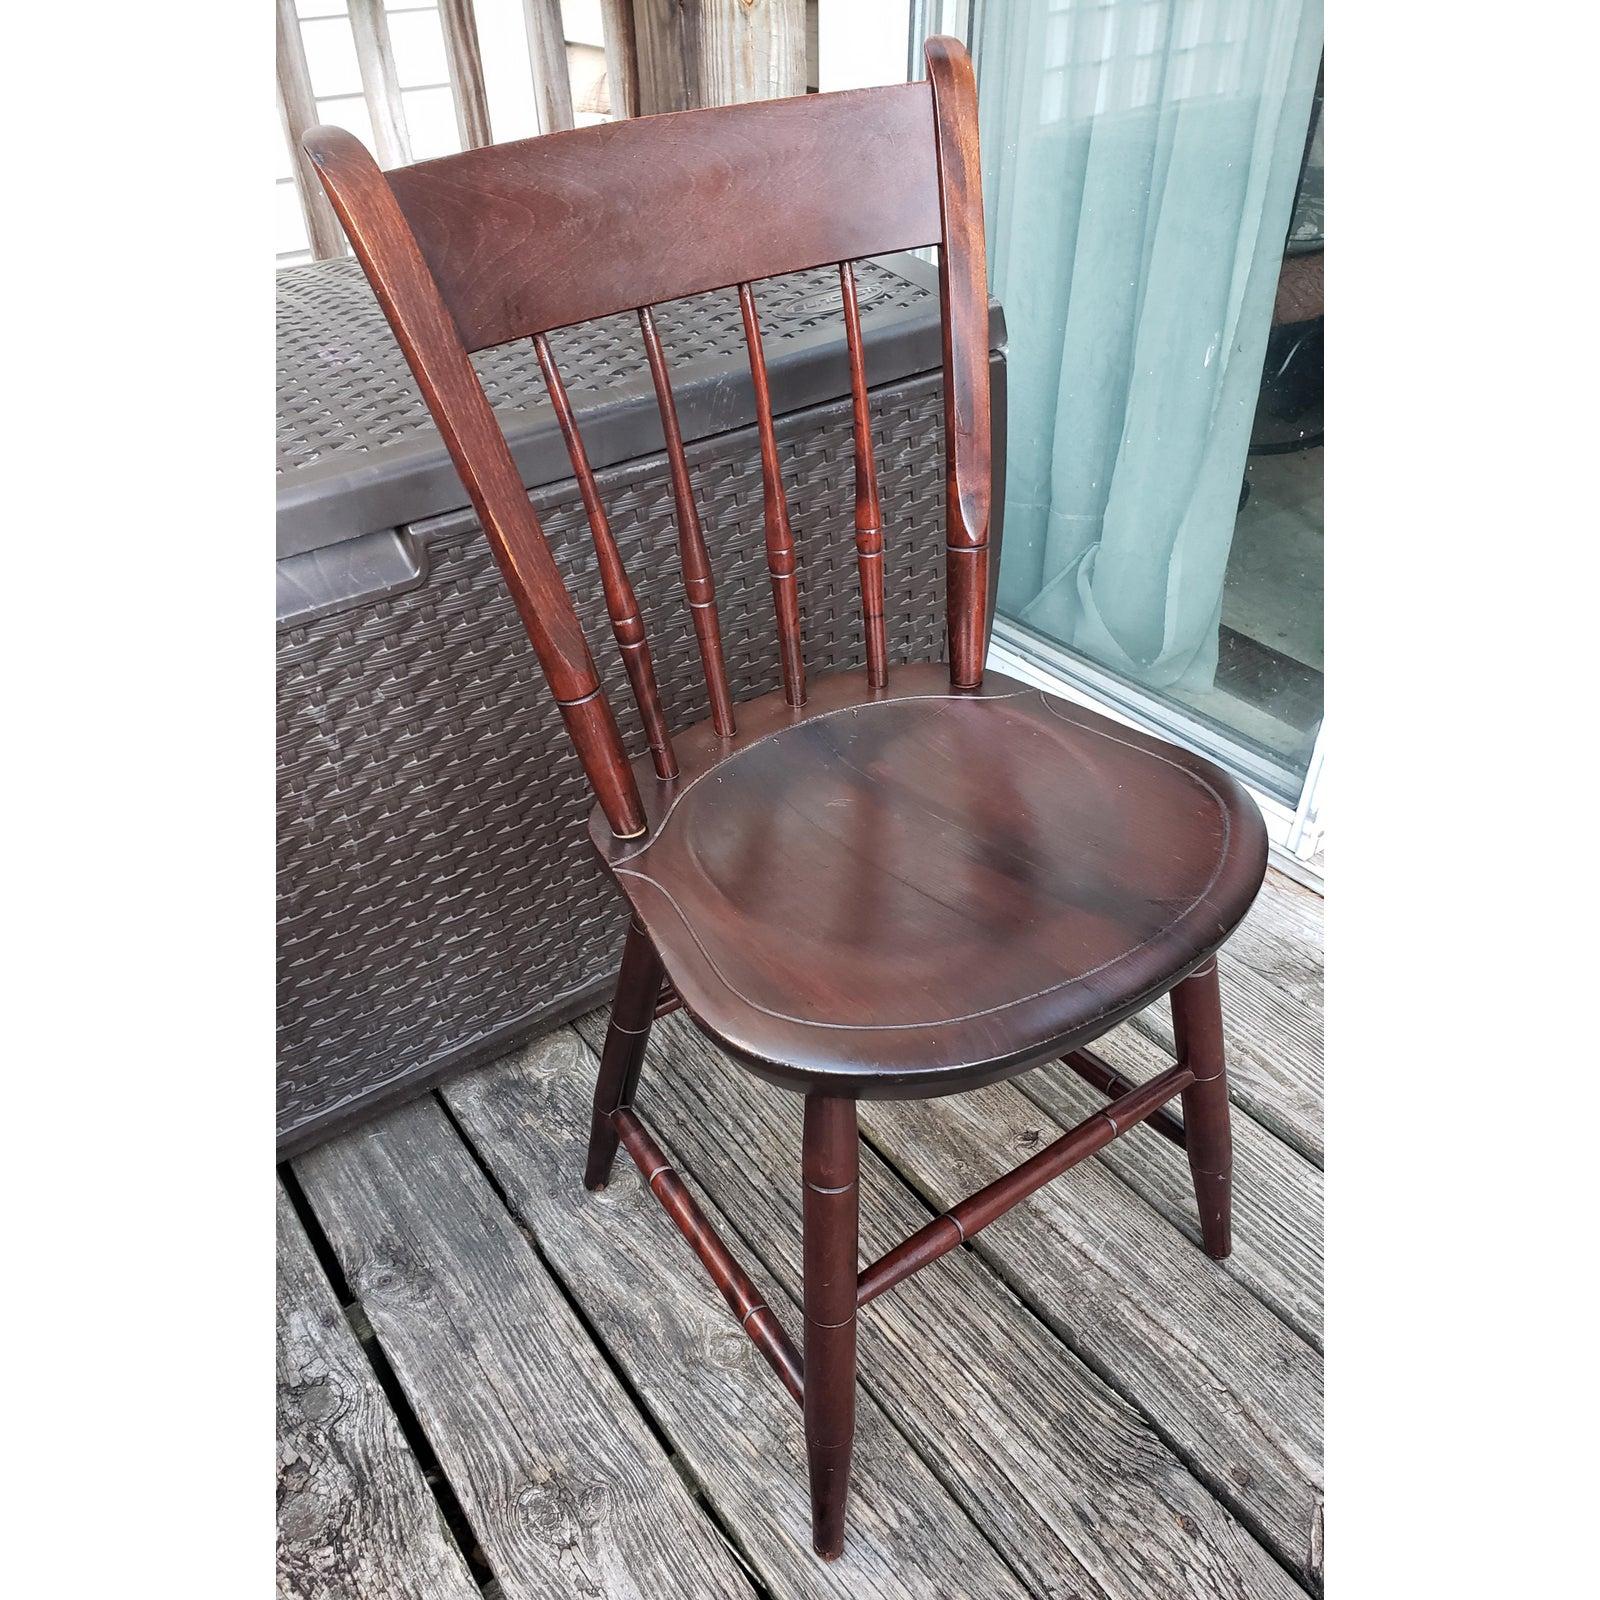 Authentic 1938 NE Hurricane Souvenir chair in dark finish. Chair has been refinished and is in great structural condition.
Measures: 15.5